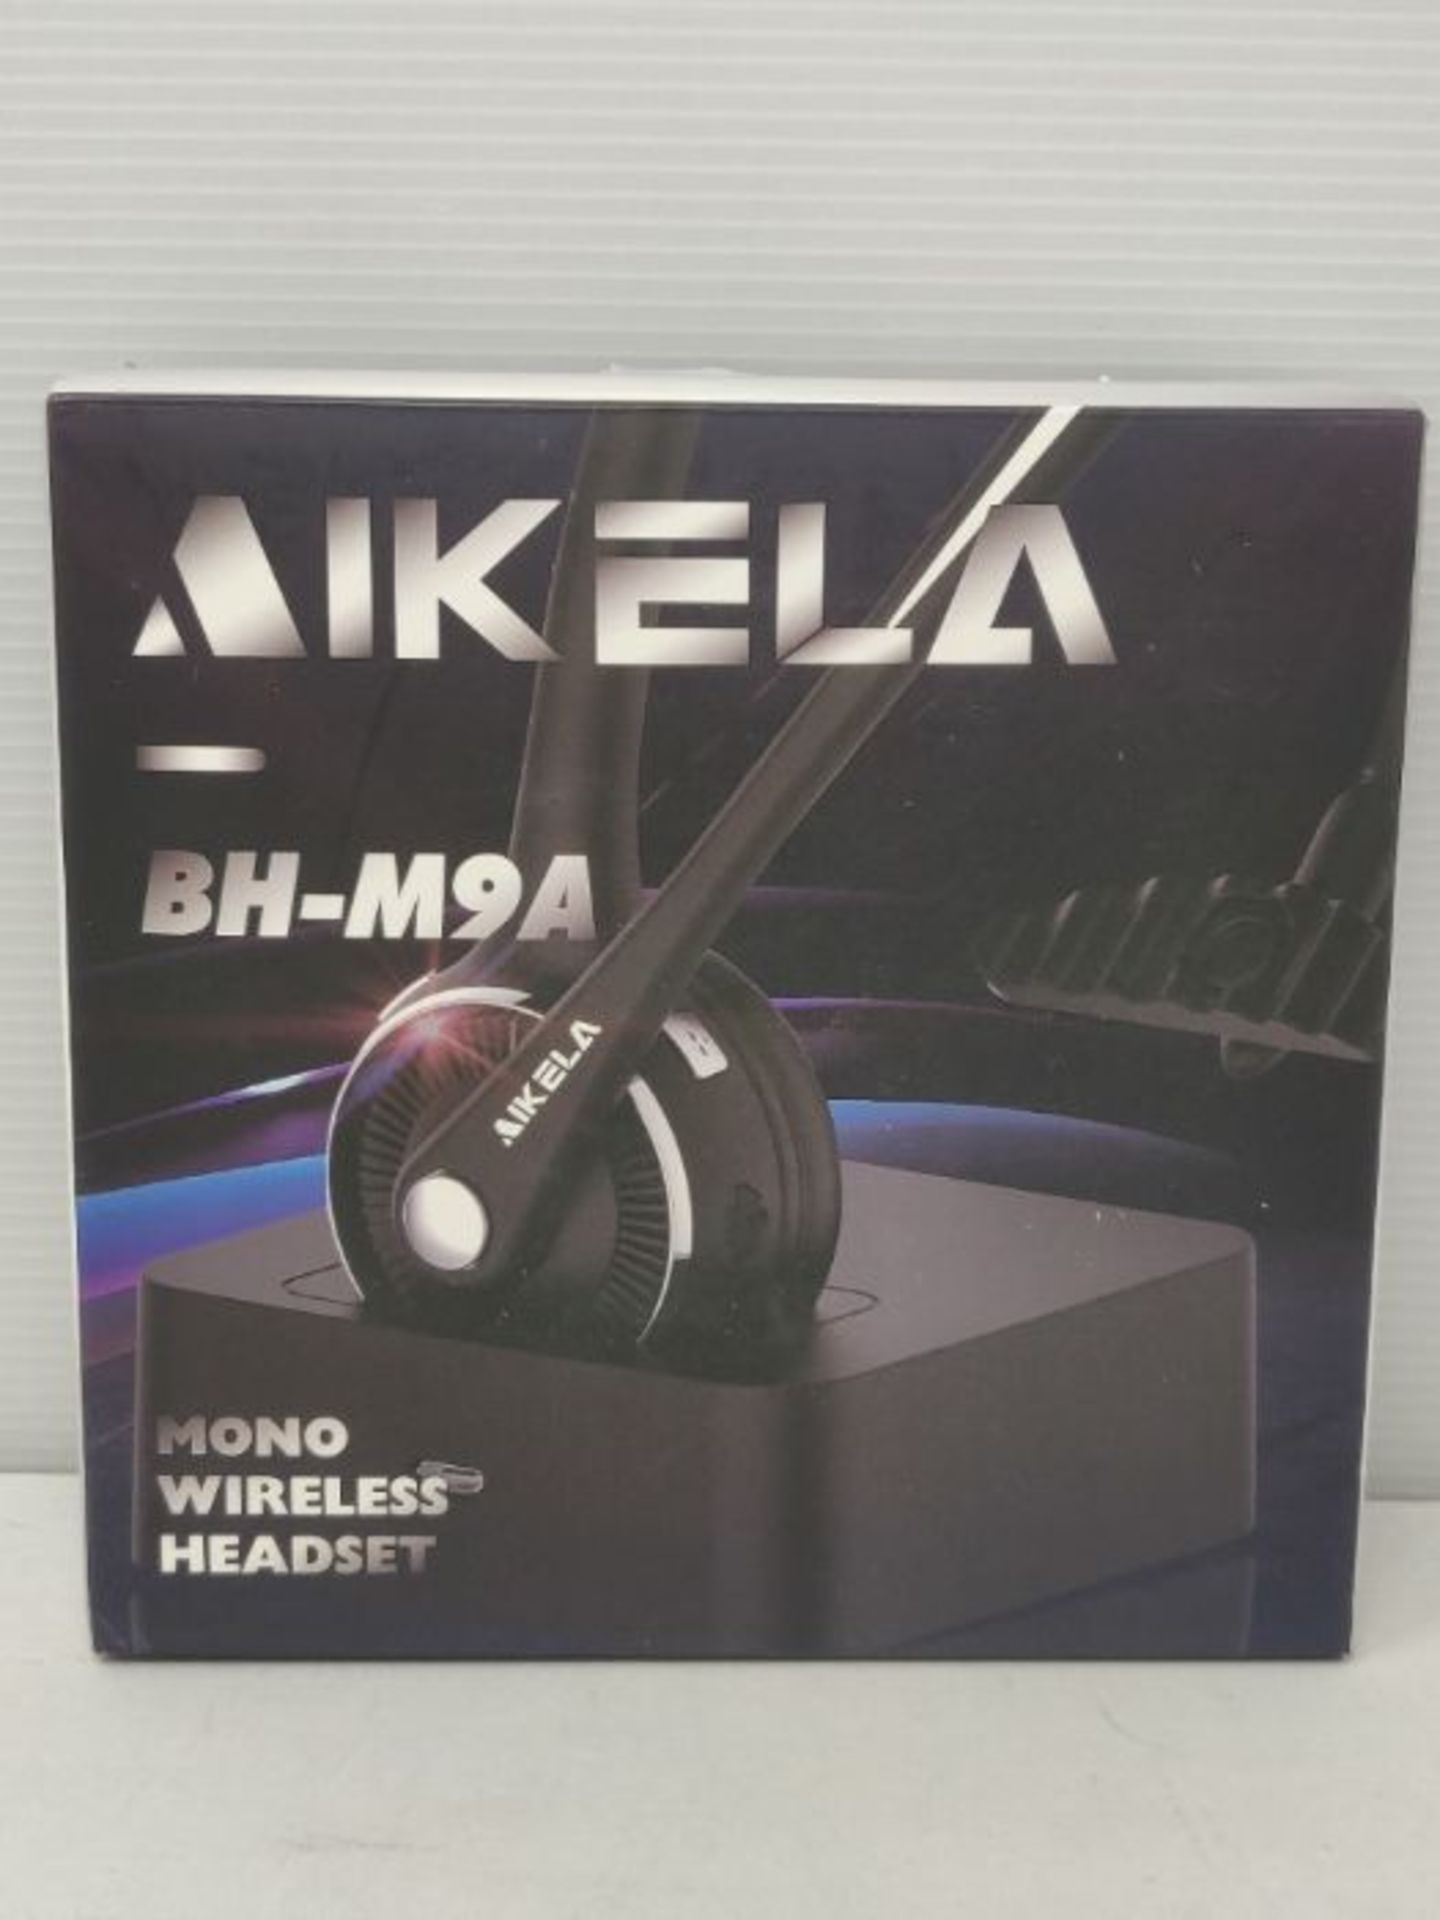 AIKELA V5.0 Bluetooth Headset with Noise Cancelling Microphone, Wireless Headset with - Image 2 of 3